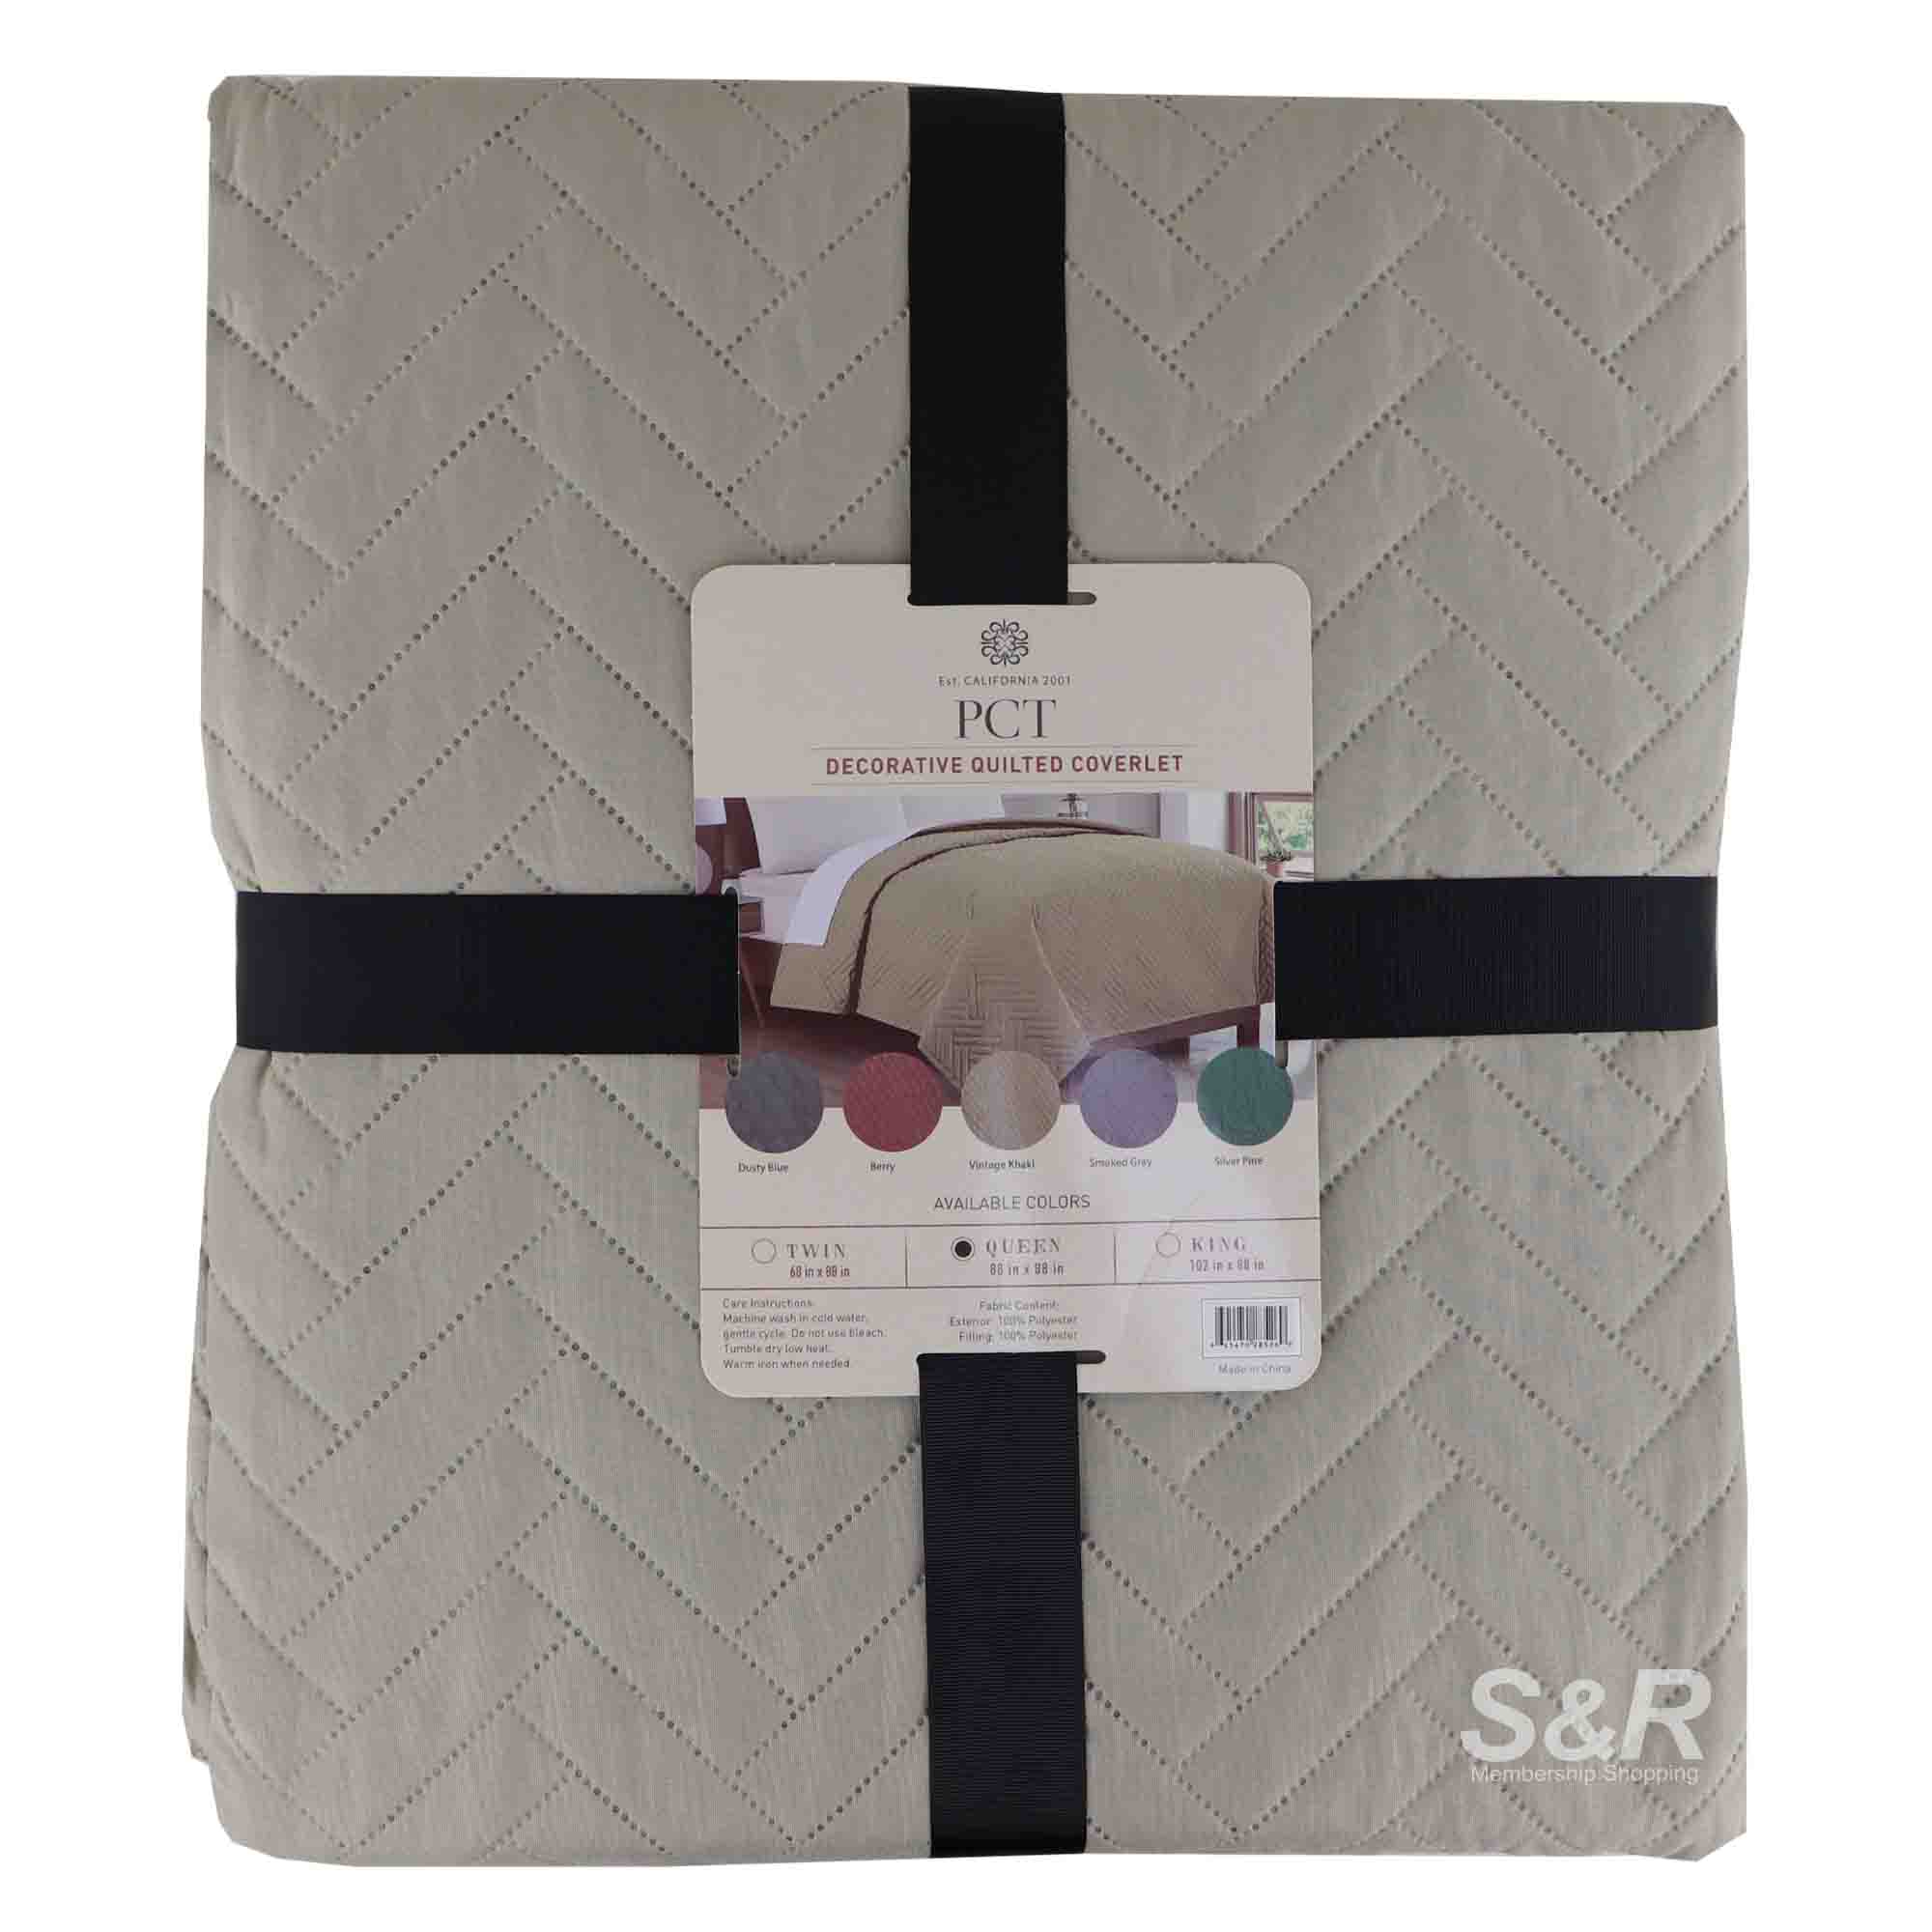 Decorative Quilted Coverlet